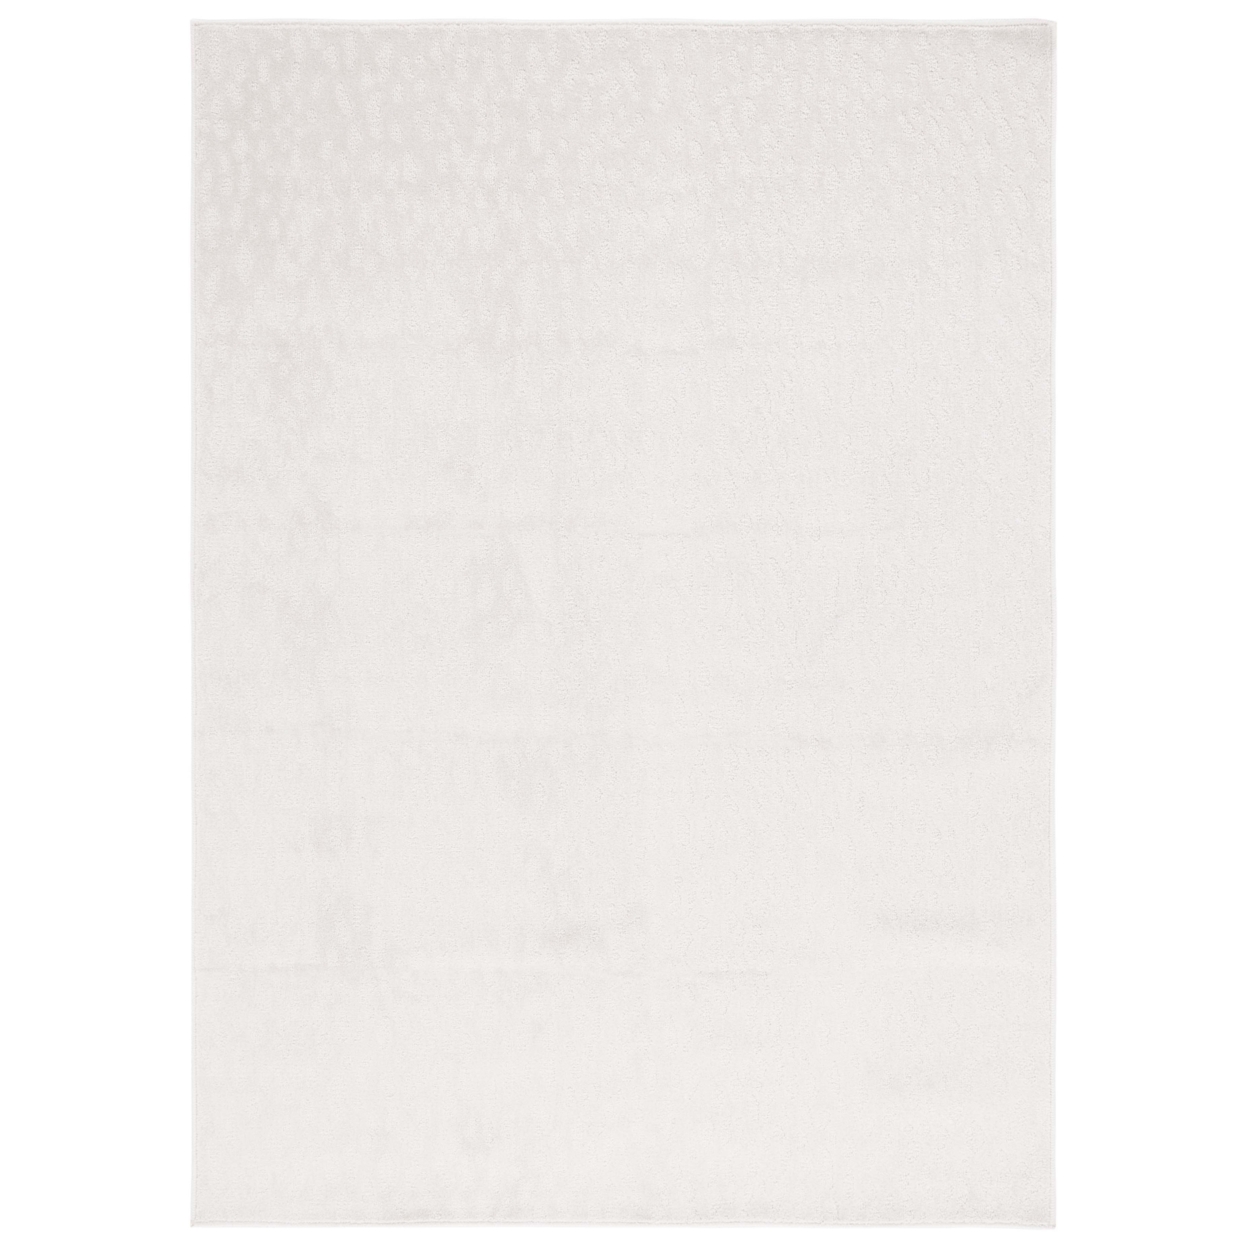 Safavieh PNS408A Pattern And Solid Ivory - Dark Grey / Ivory, 5'-3 X 7'-6 Rectangle